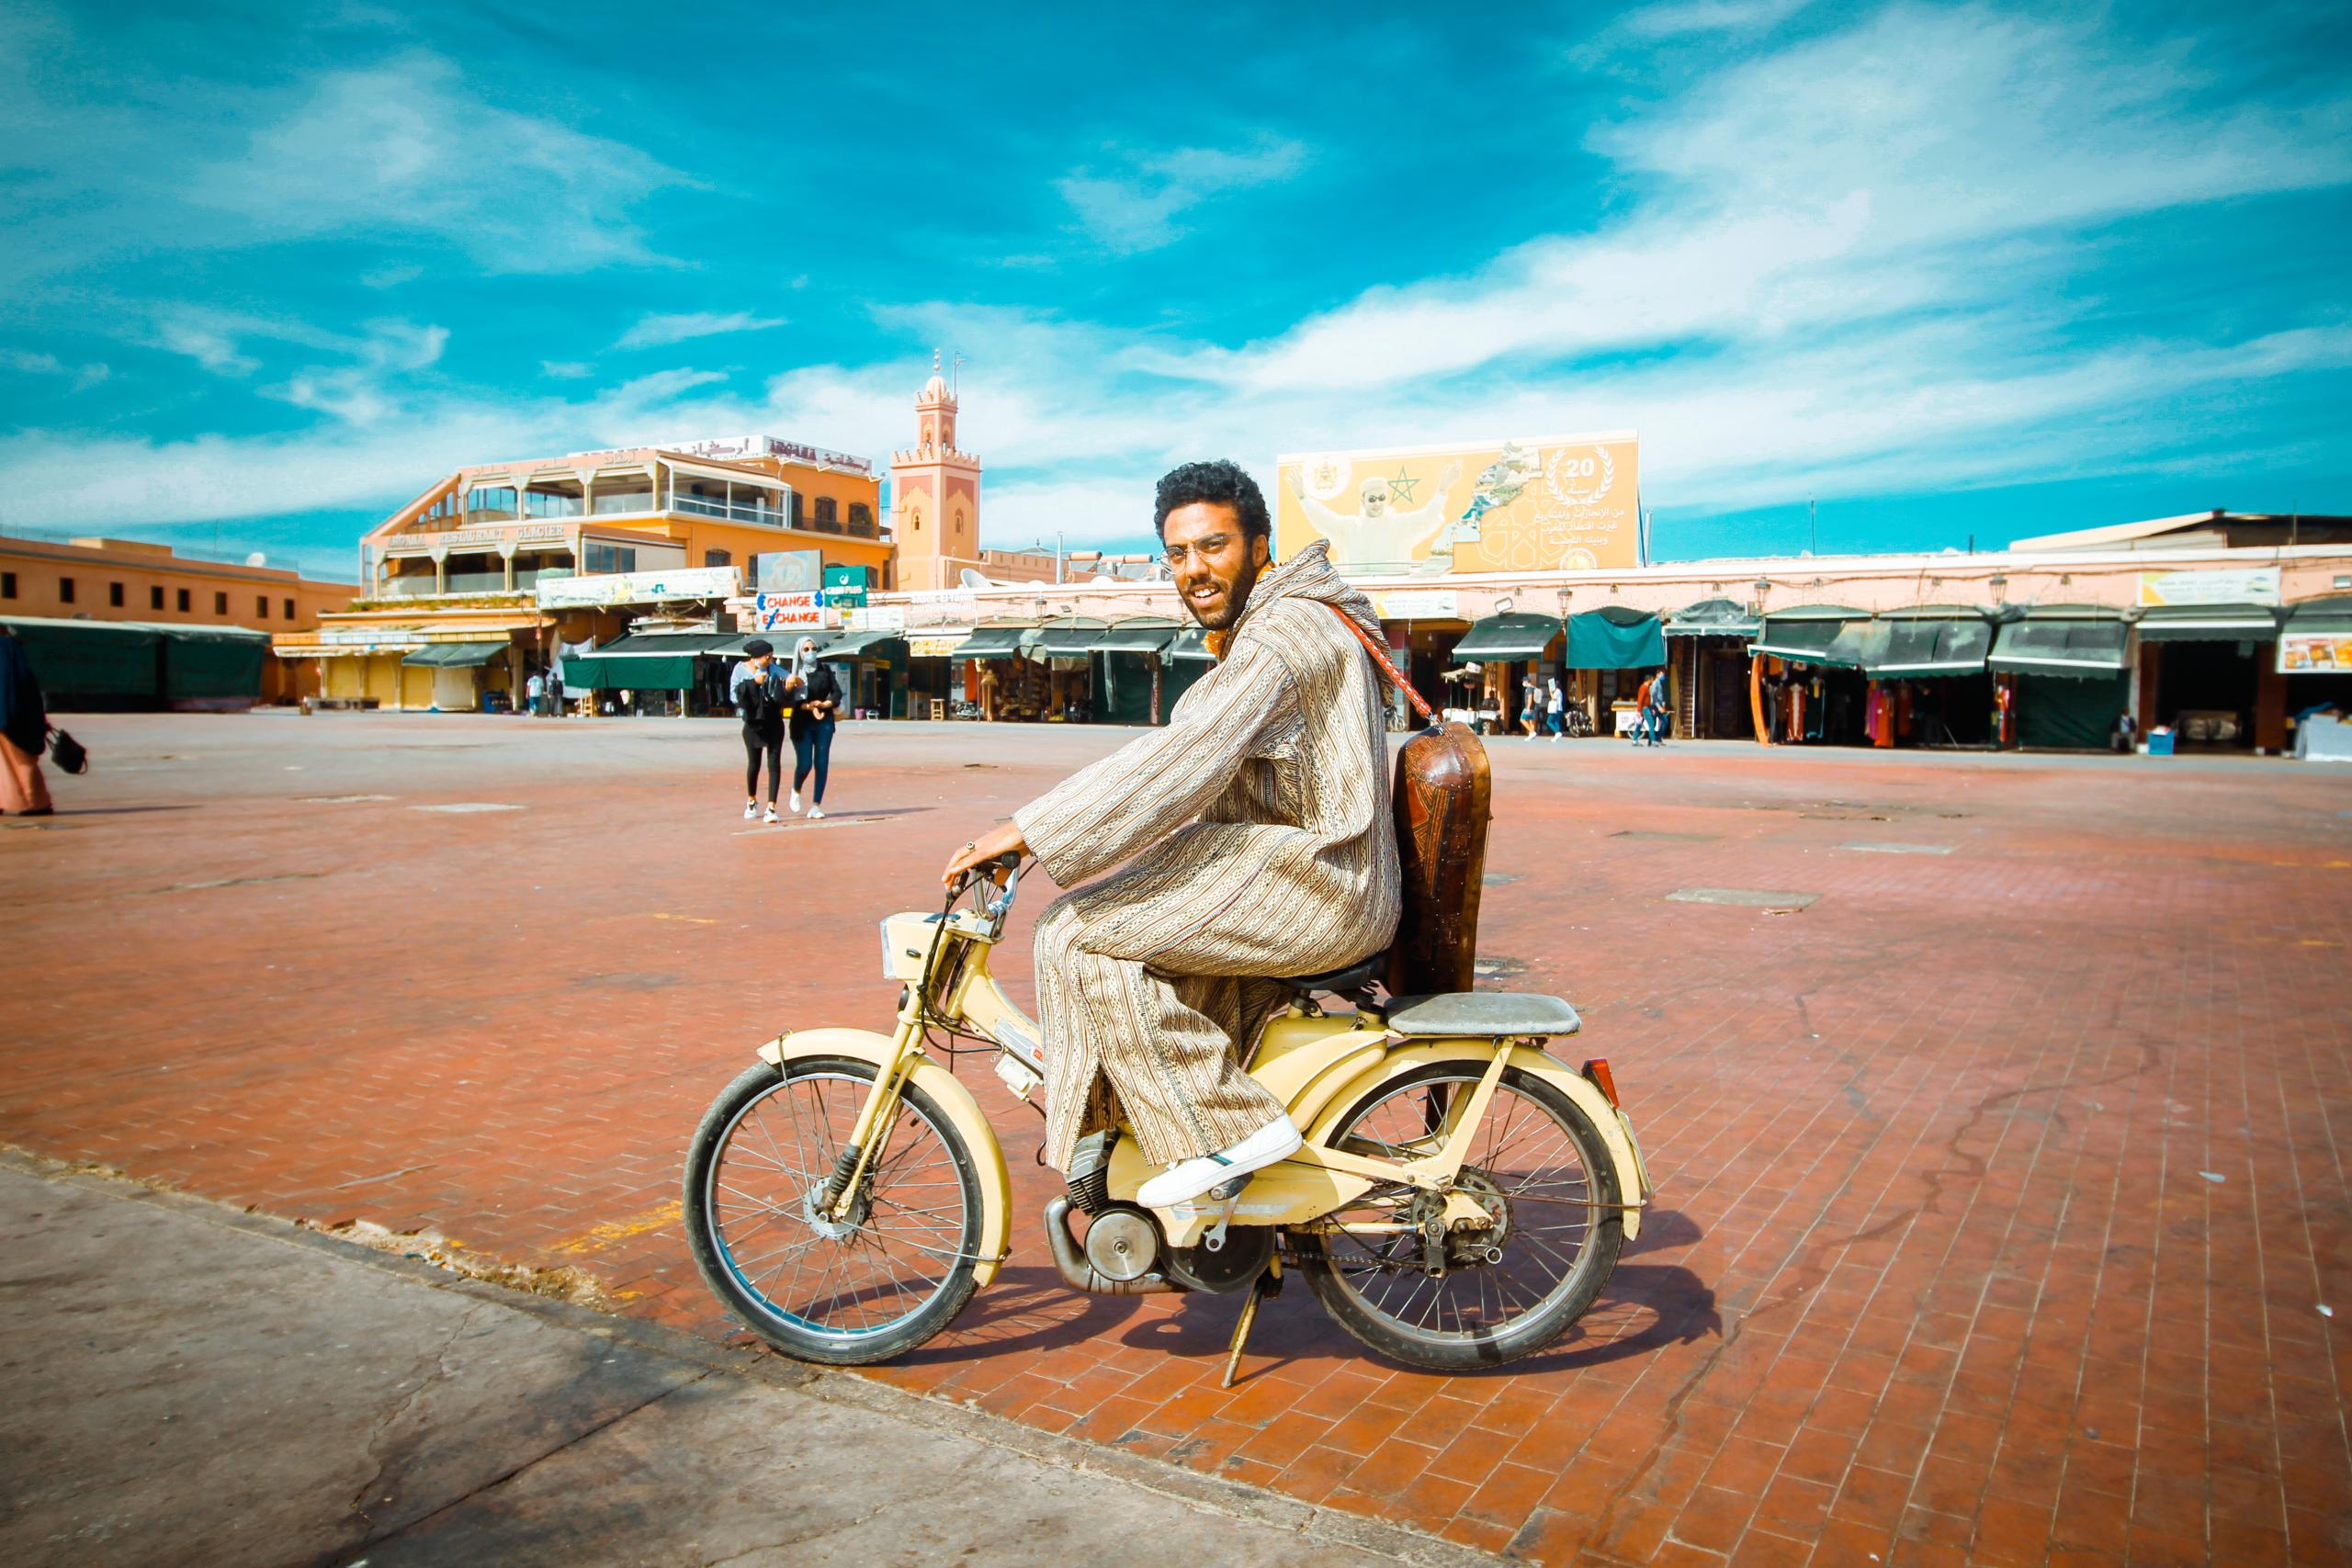 The musician Ramdan in a large marketplace. He is sitting on a moped in a traditional North African garb.